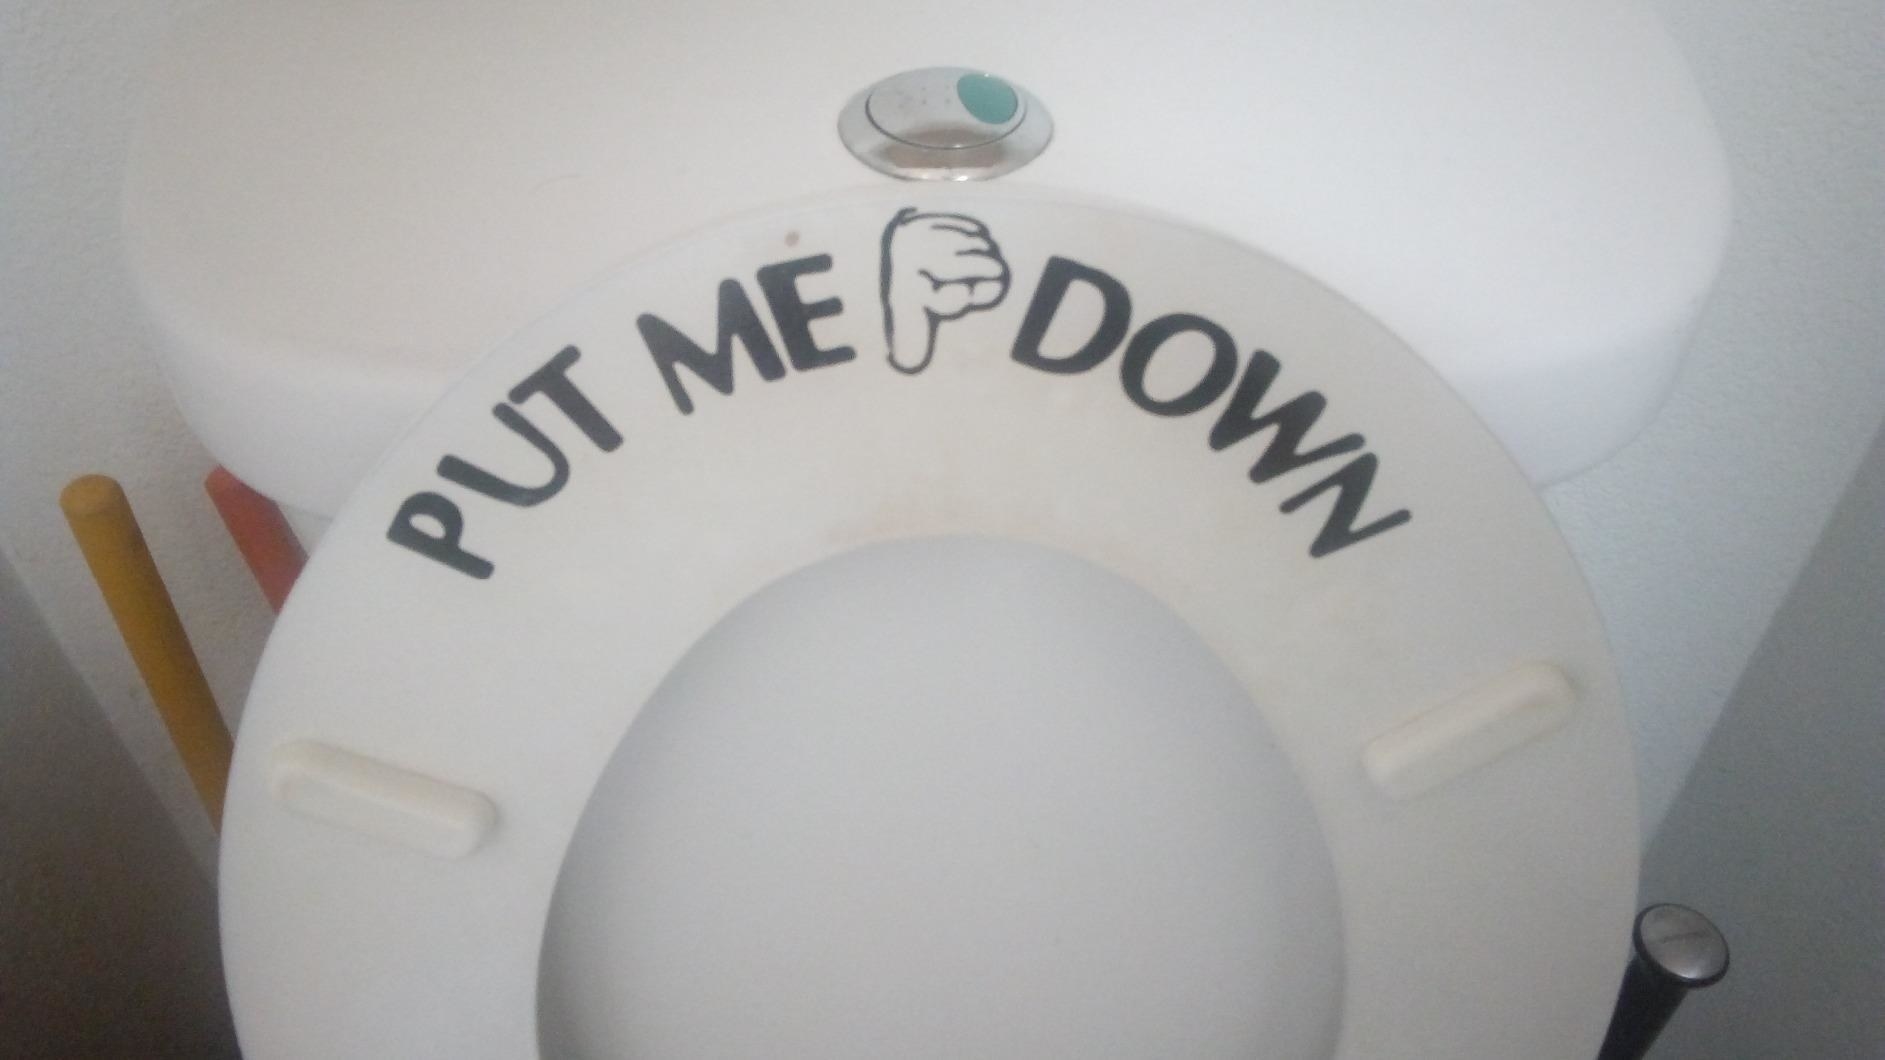 sticker on toilet seat that says &quot;put me down&quot; 